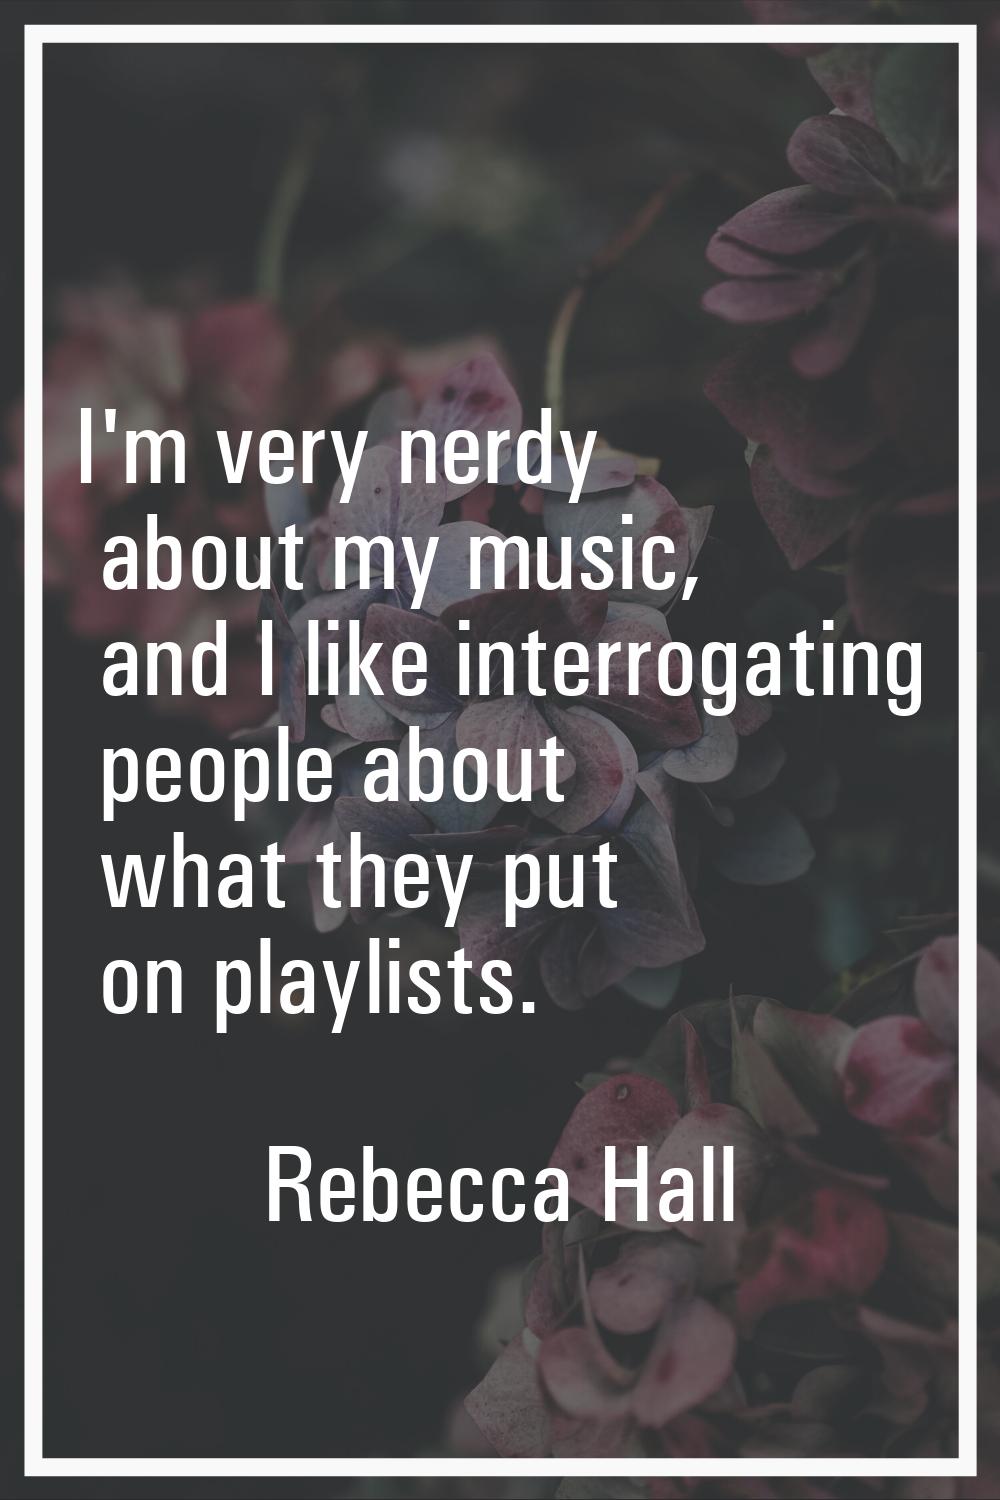 I'm very nerdy about my music, and I like interrogating people about what they put on playlists.